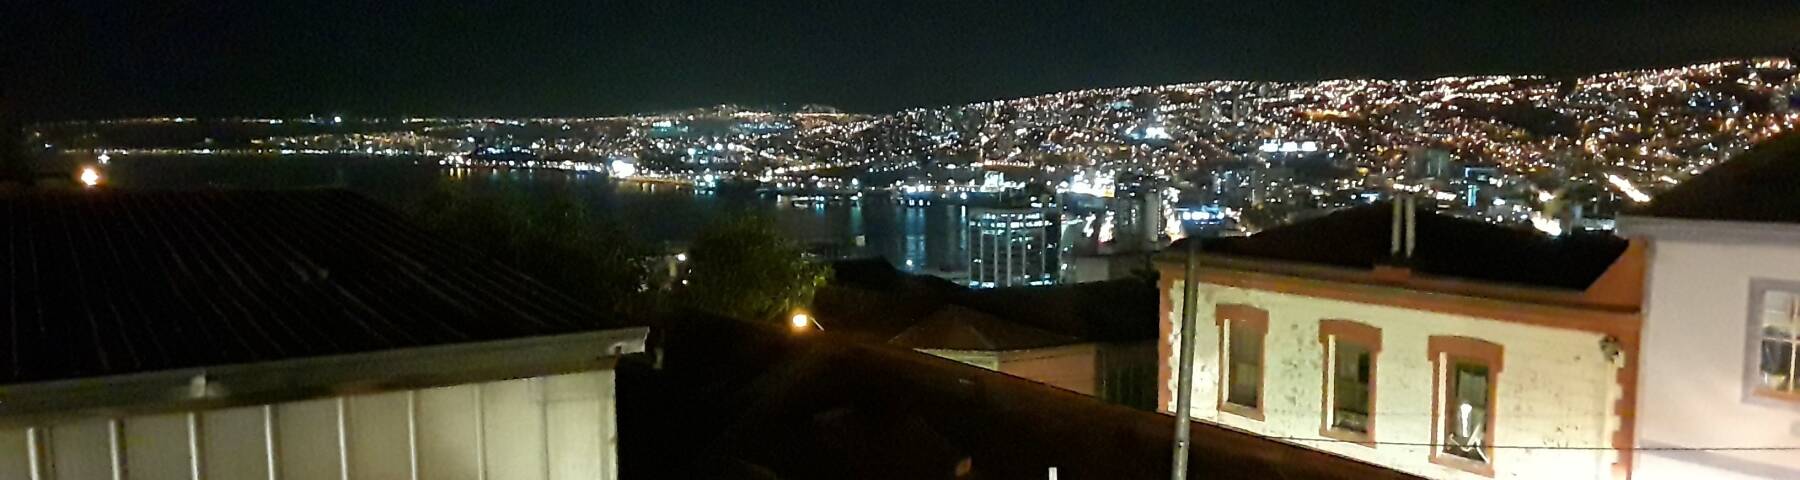 Harbor and hills of Valparaíso at night.